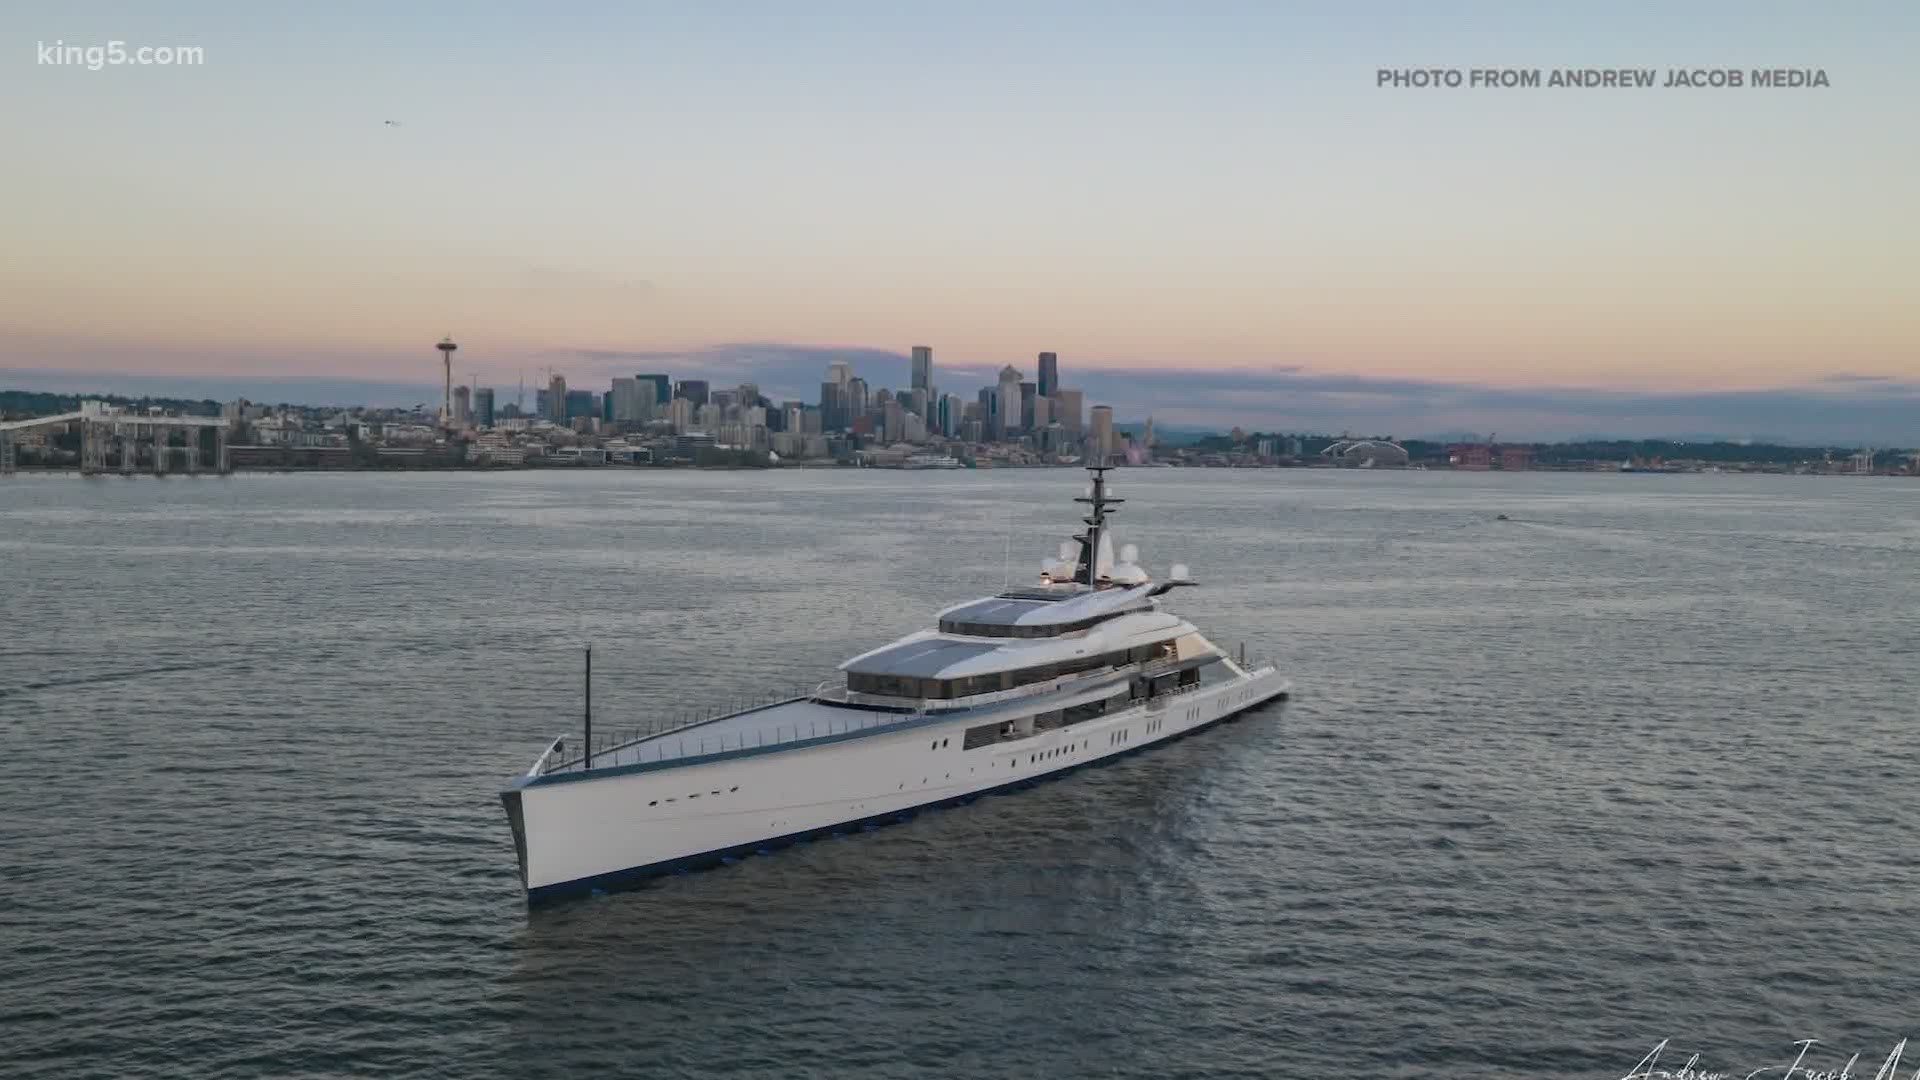 Dallas Cowboys owner Jerry Jones brought his mega yacht, which is the size of a football field, through Seattle this week and even dwarfed a passing ferry boat.